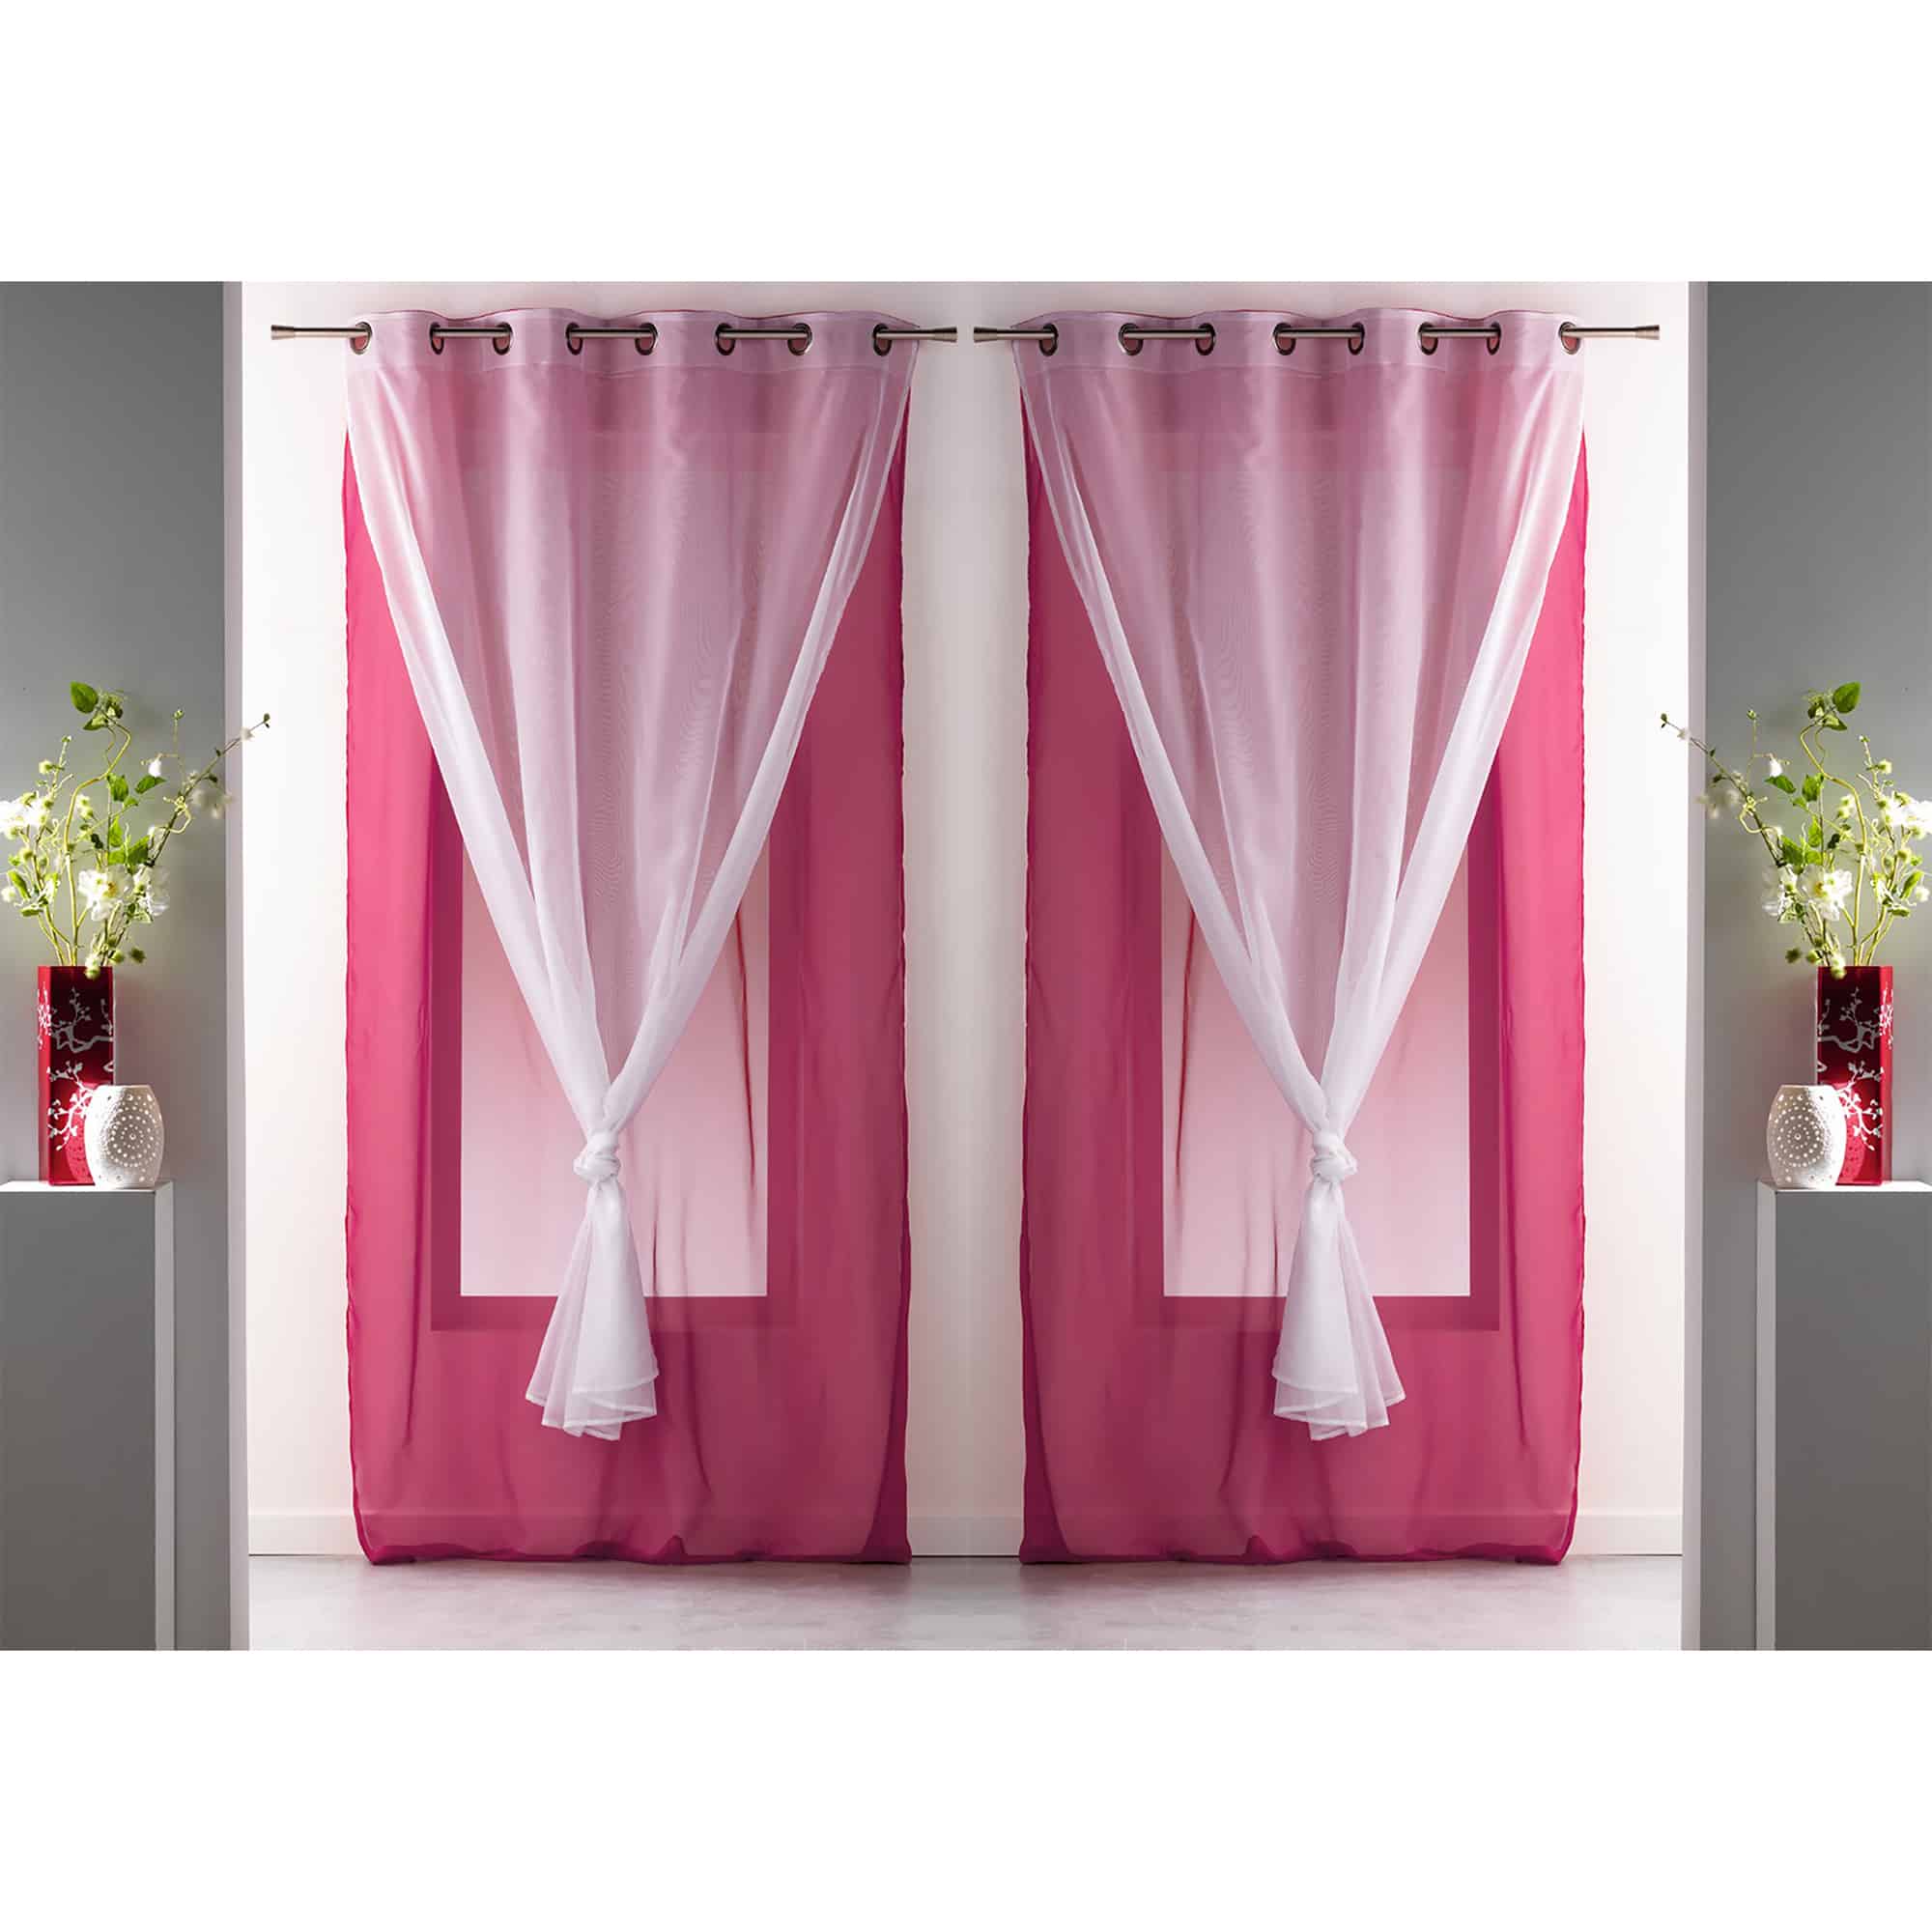 double sheer curtains solid 2 colors pink white set of 2 panels for large window